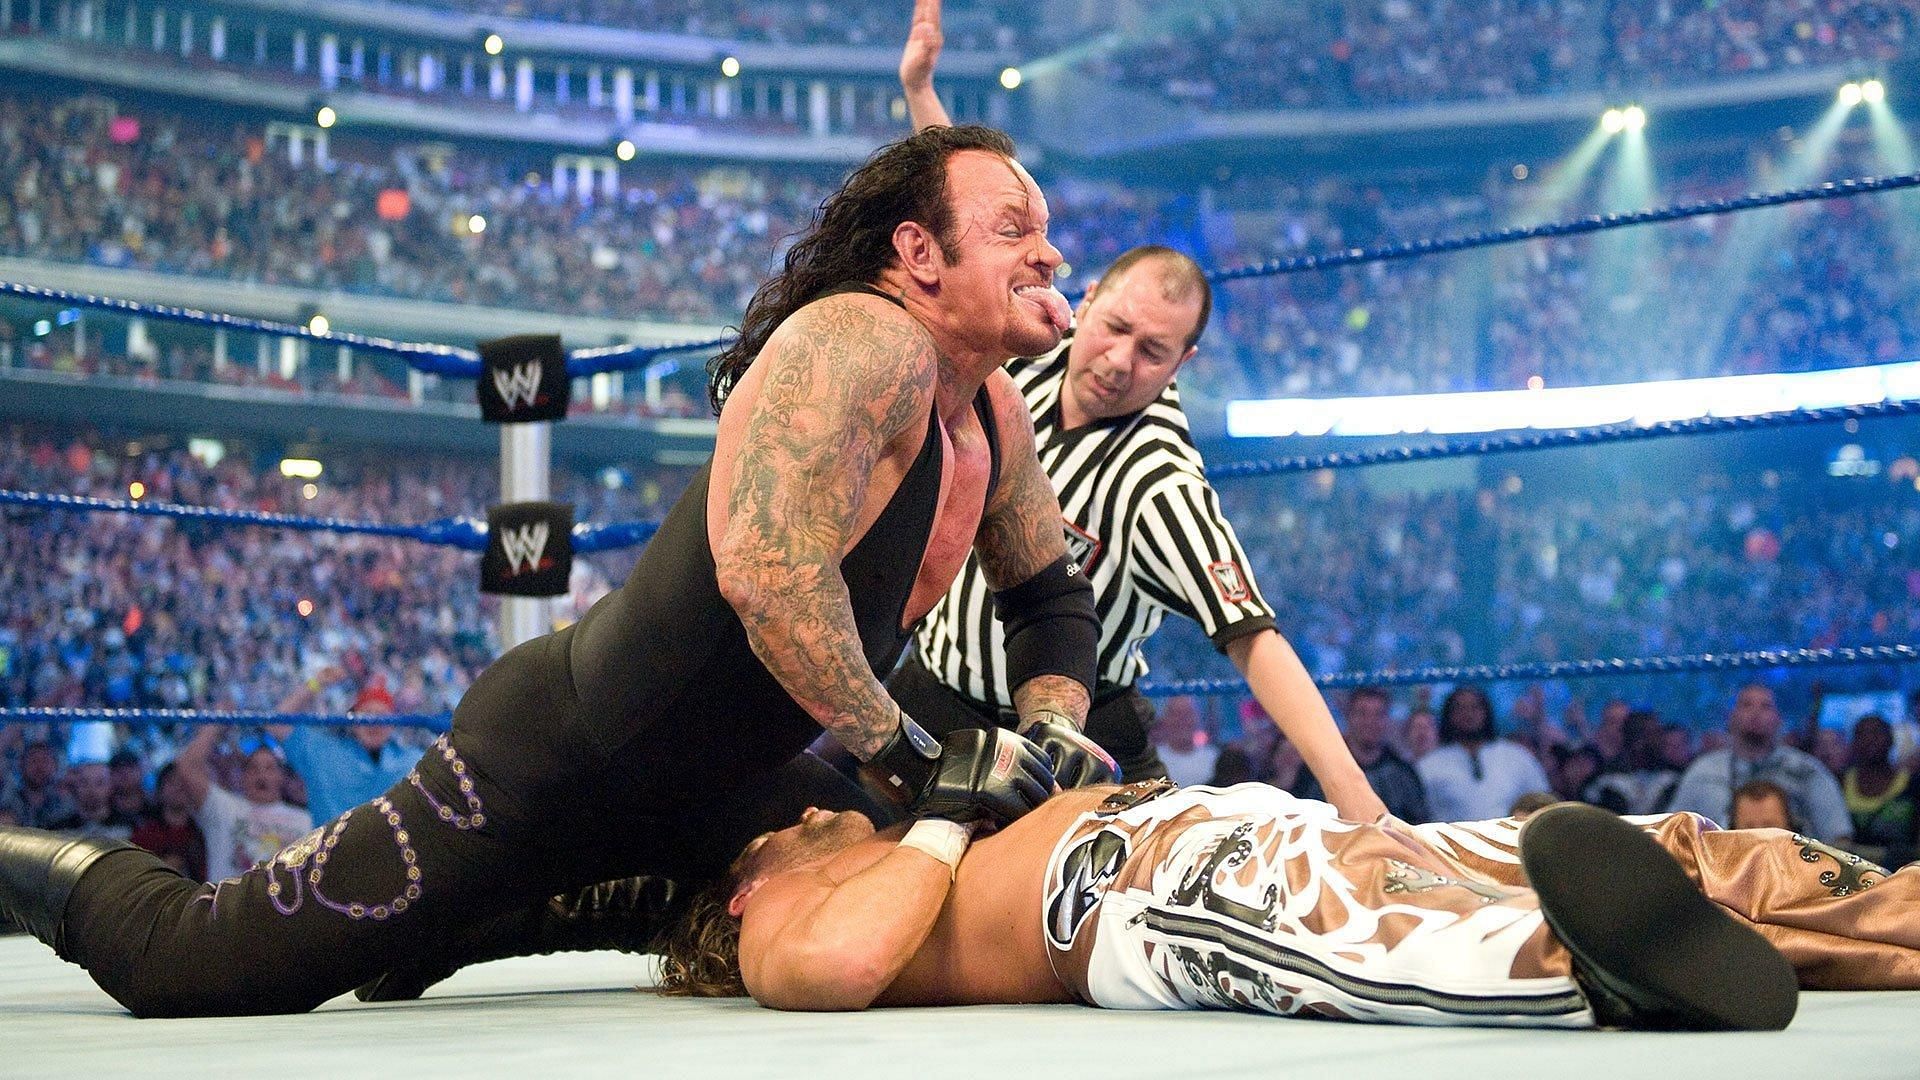 The Undertaker pinning Shawn Michaels in Texas